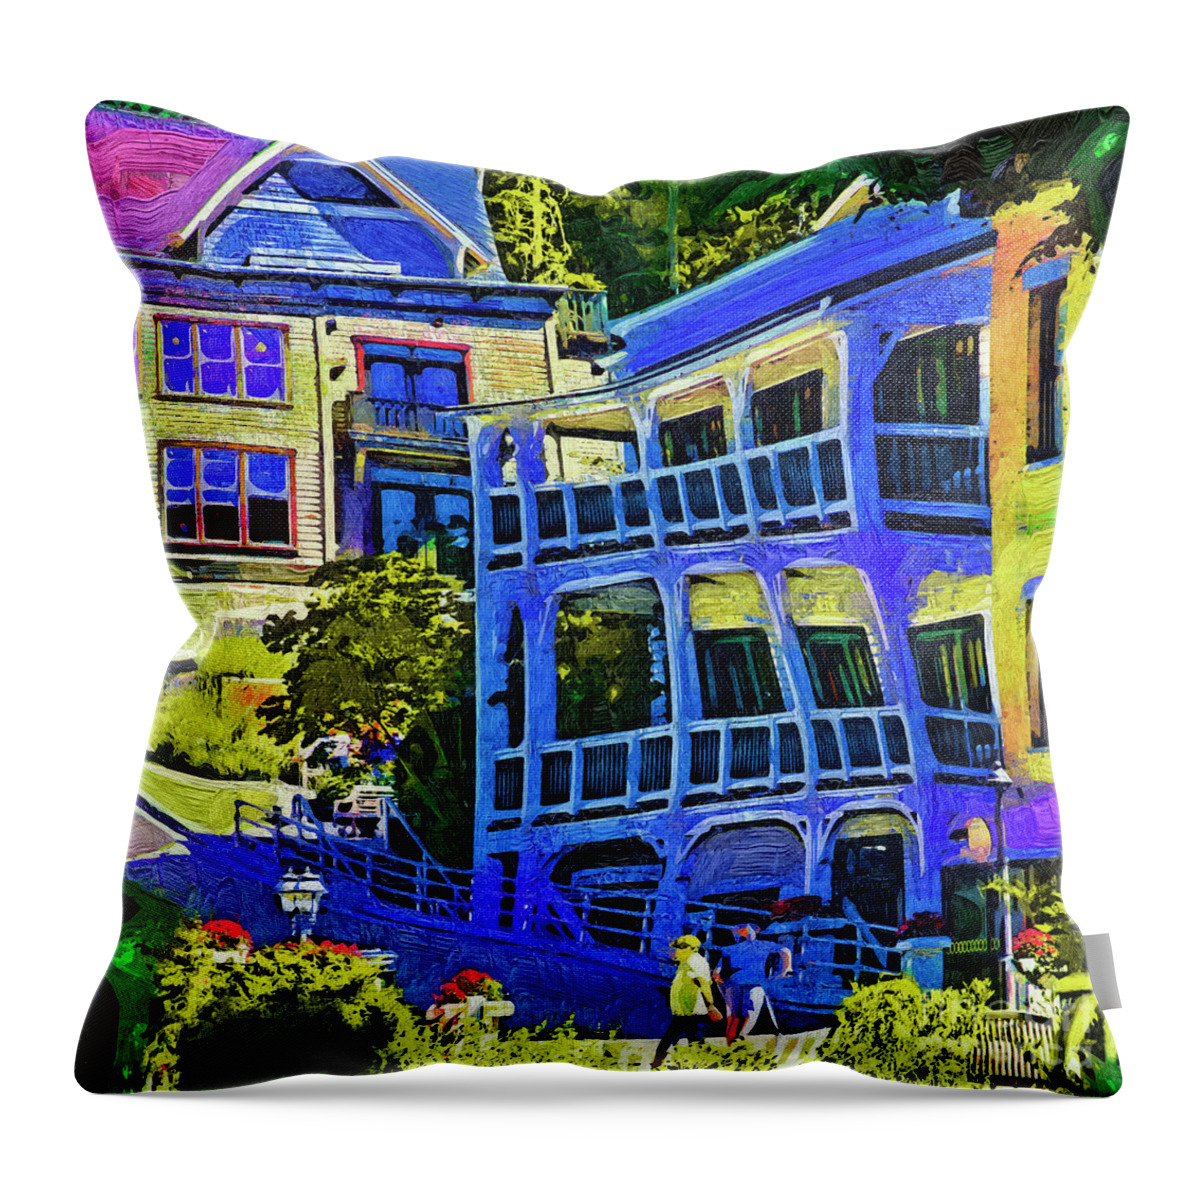 Roche-harbor Throw Pillow featuring the digital art Roche Harbor Street Scene by Kirt Tisdale